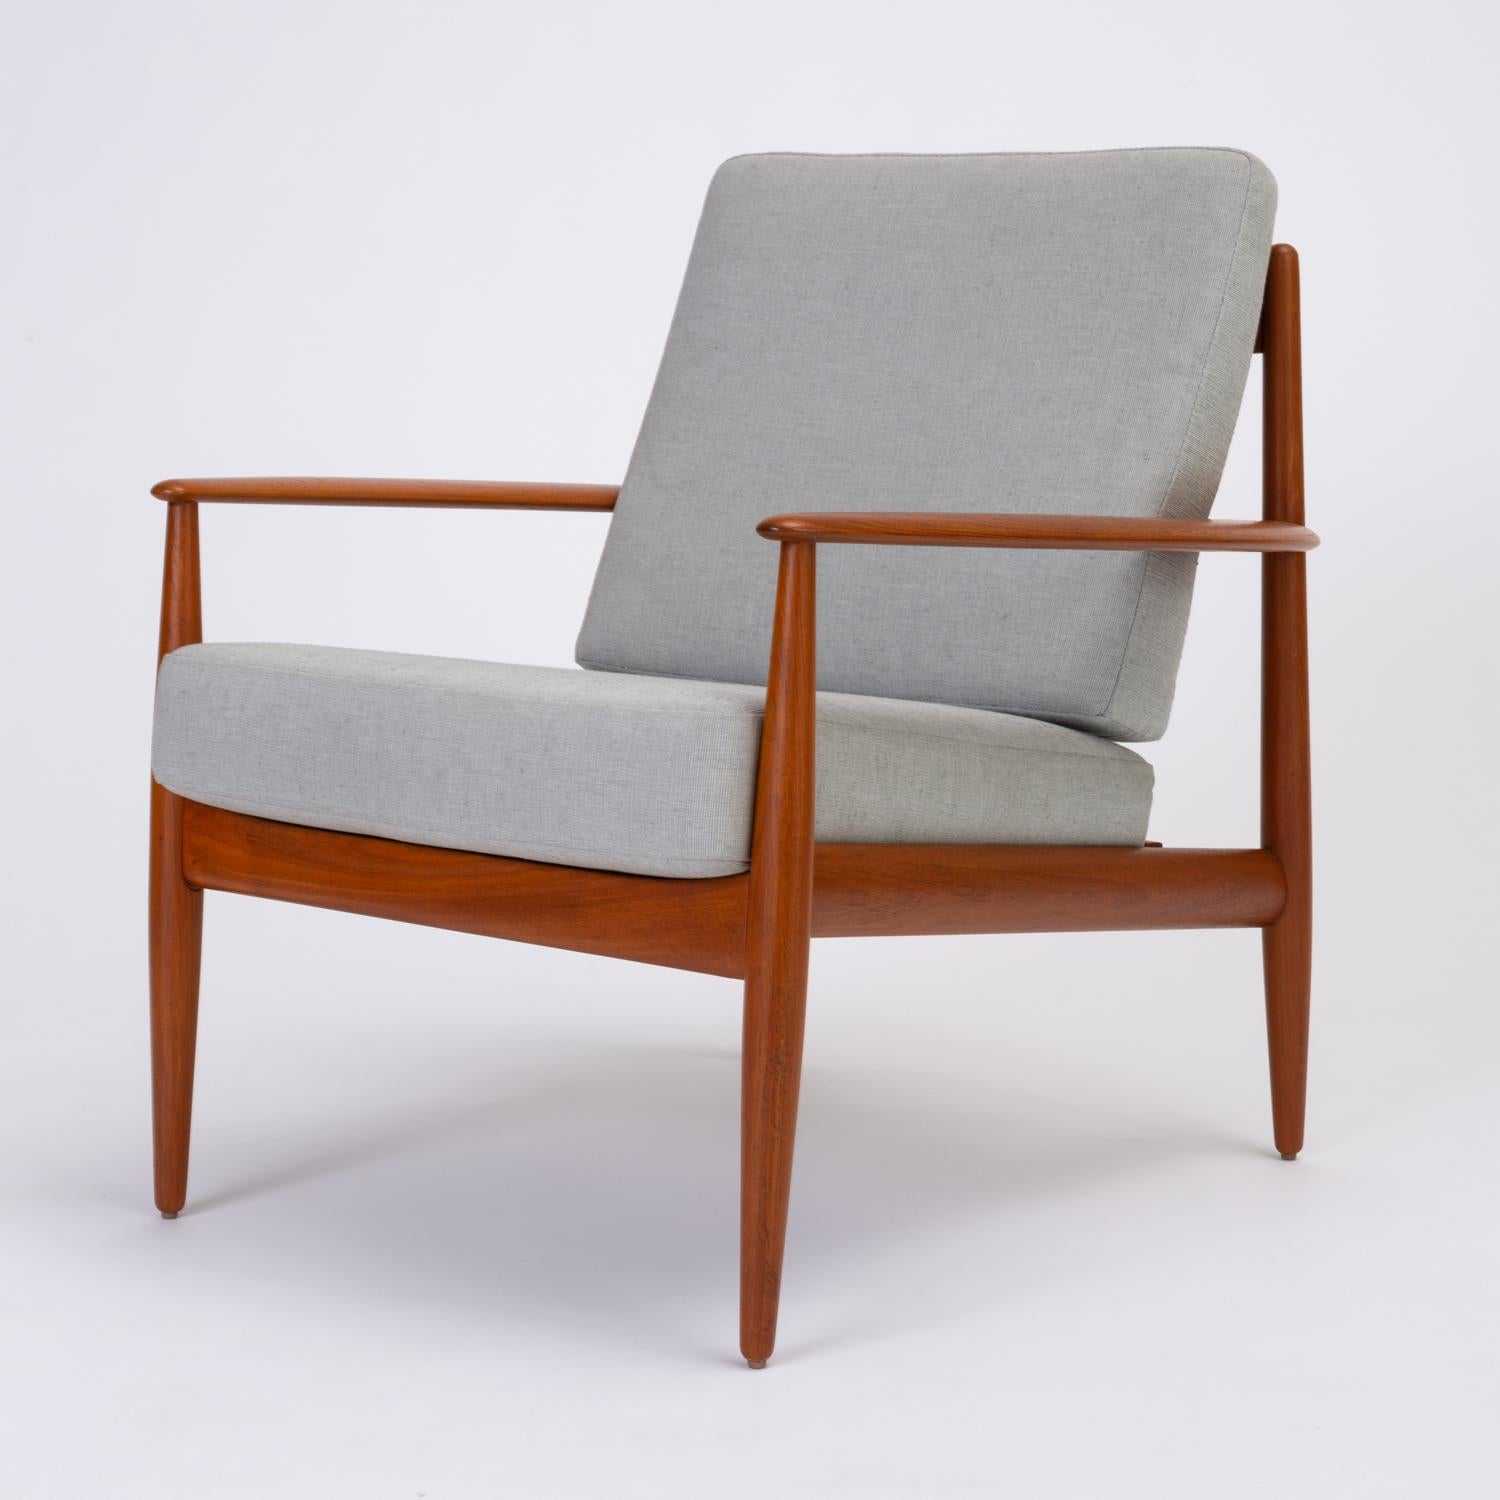 Oiled Pair of Teak Lounge Chairs by Grete Jalk for France & Son